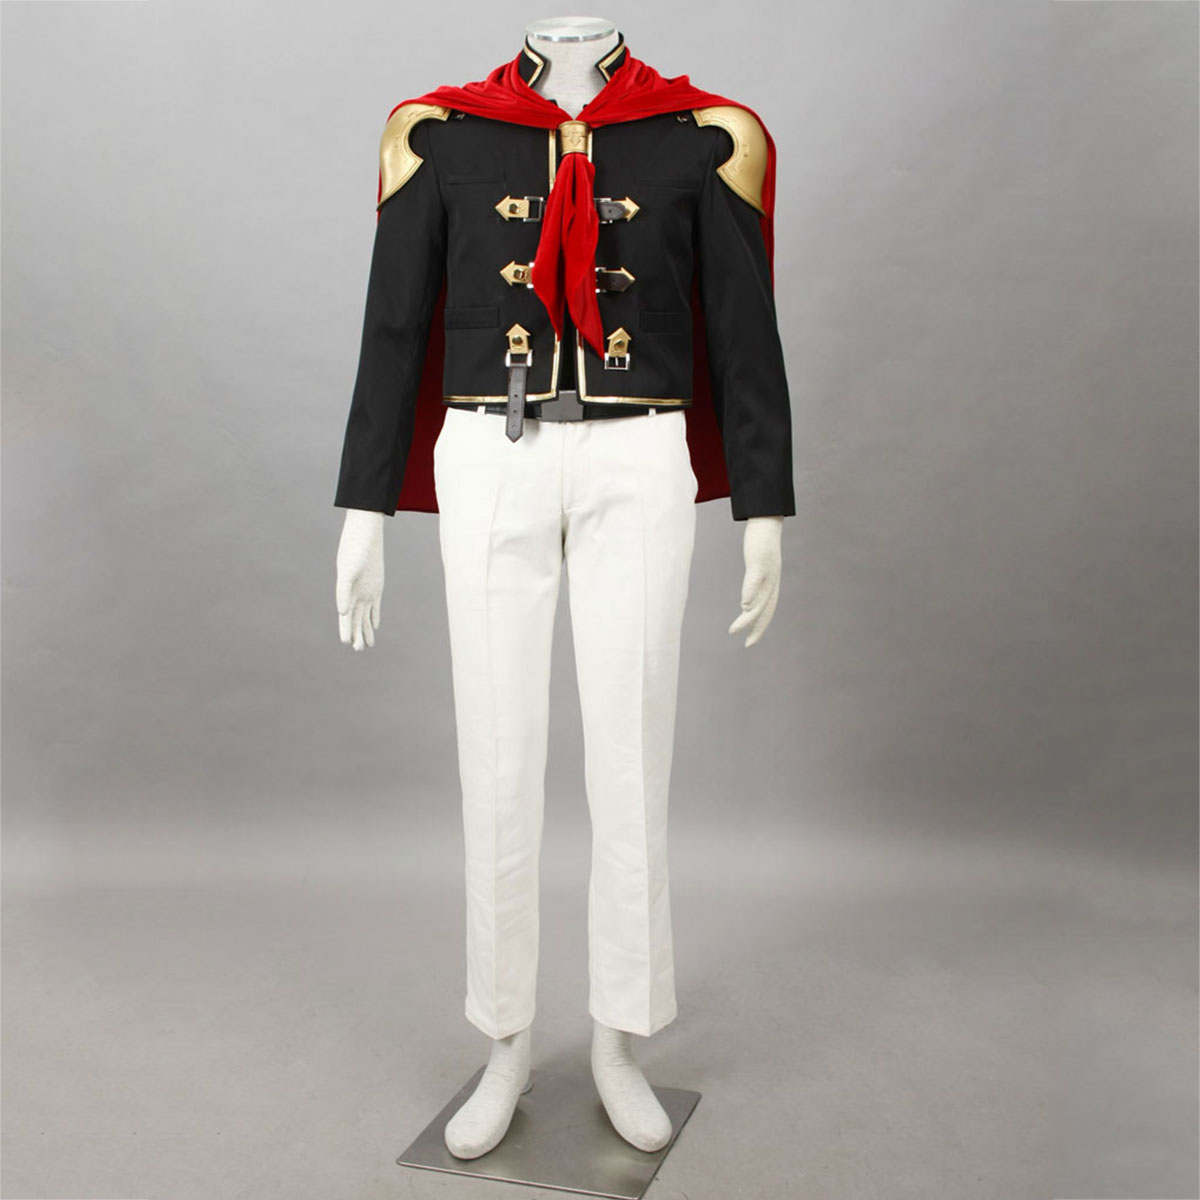 Final Fantasy Type-0 King 1 Cosplay Costumes AU